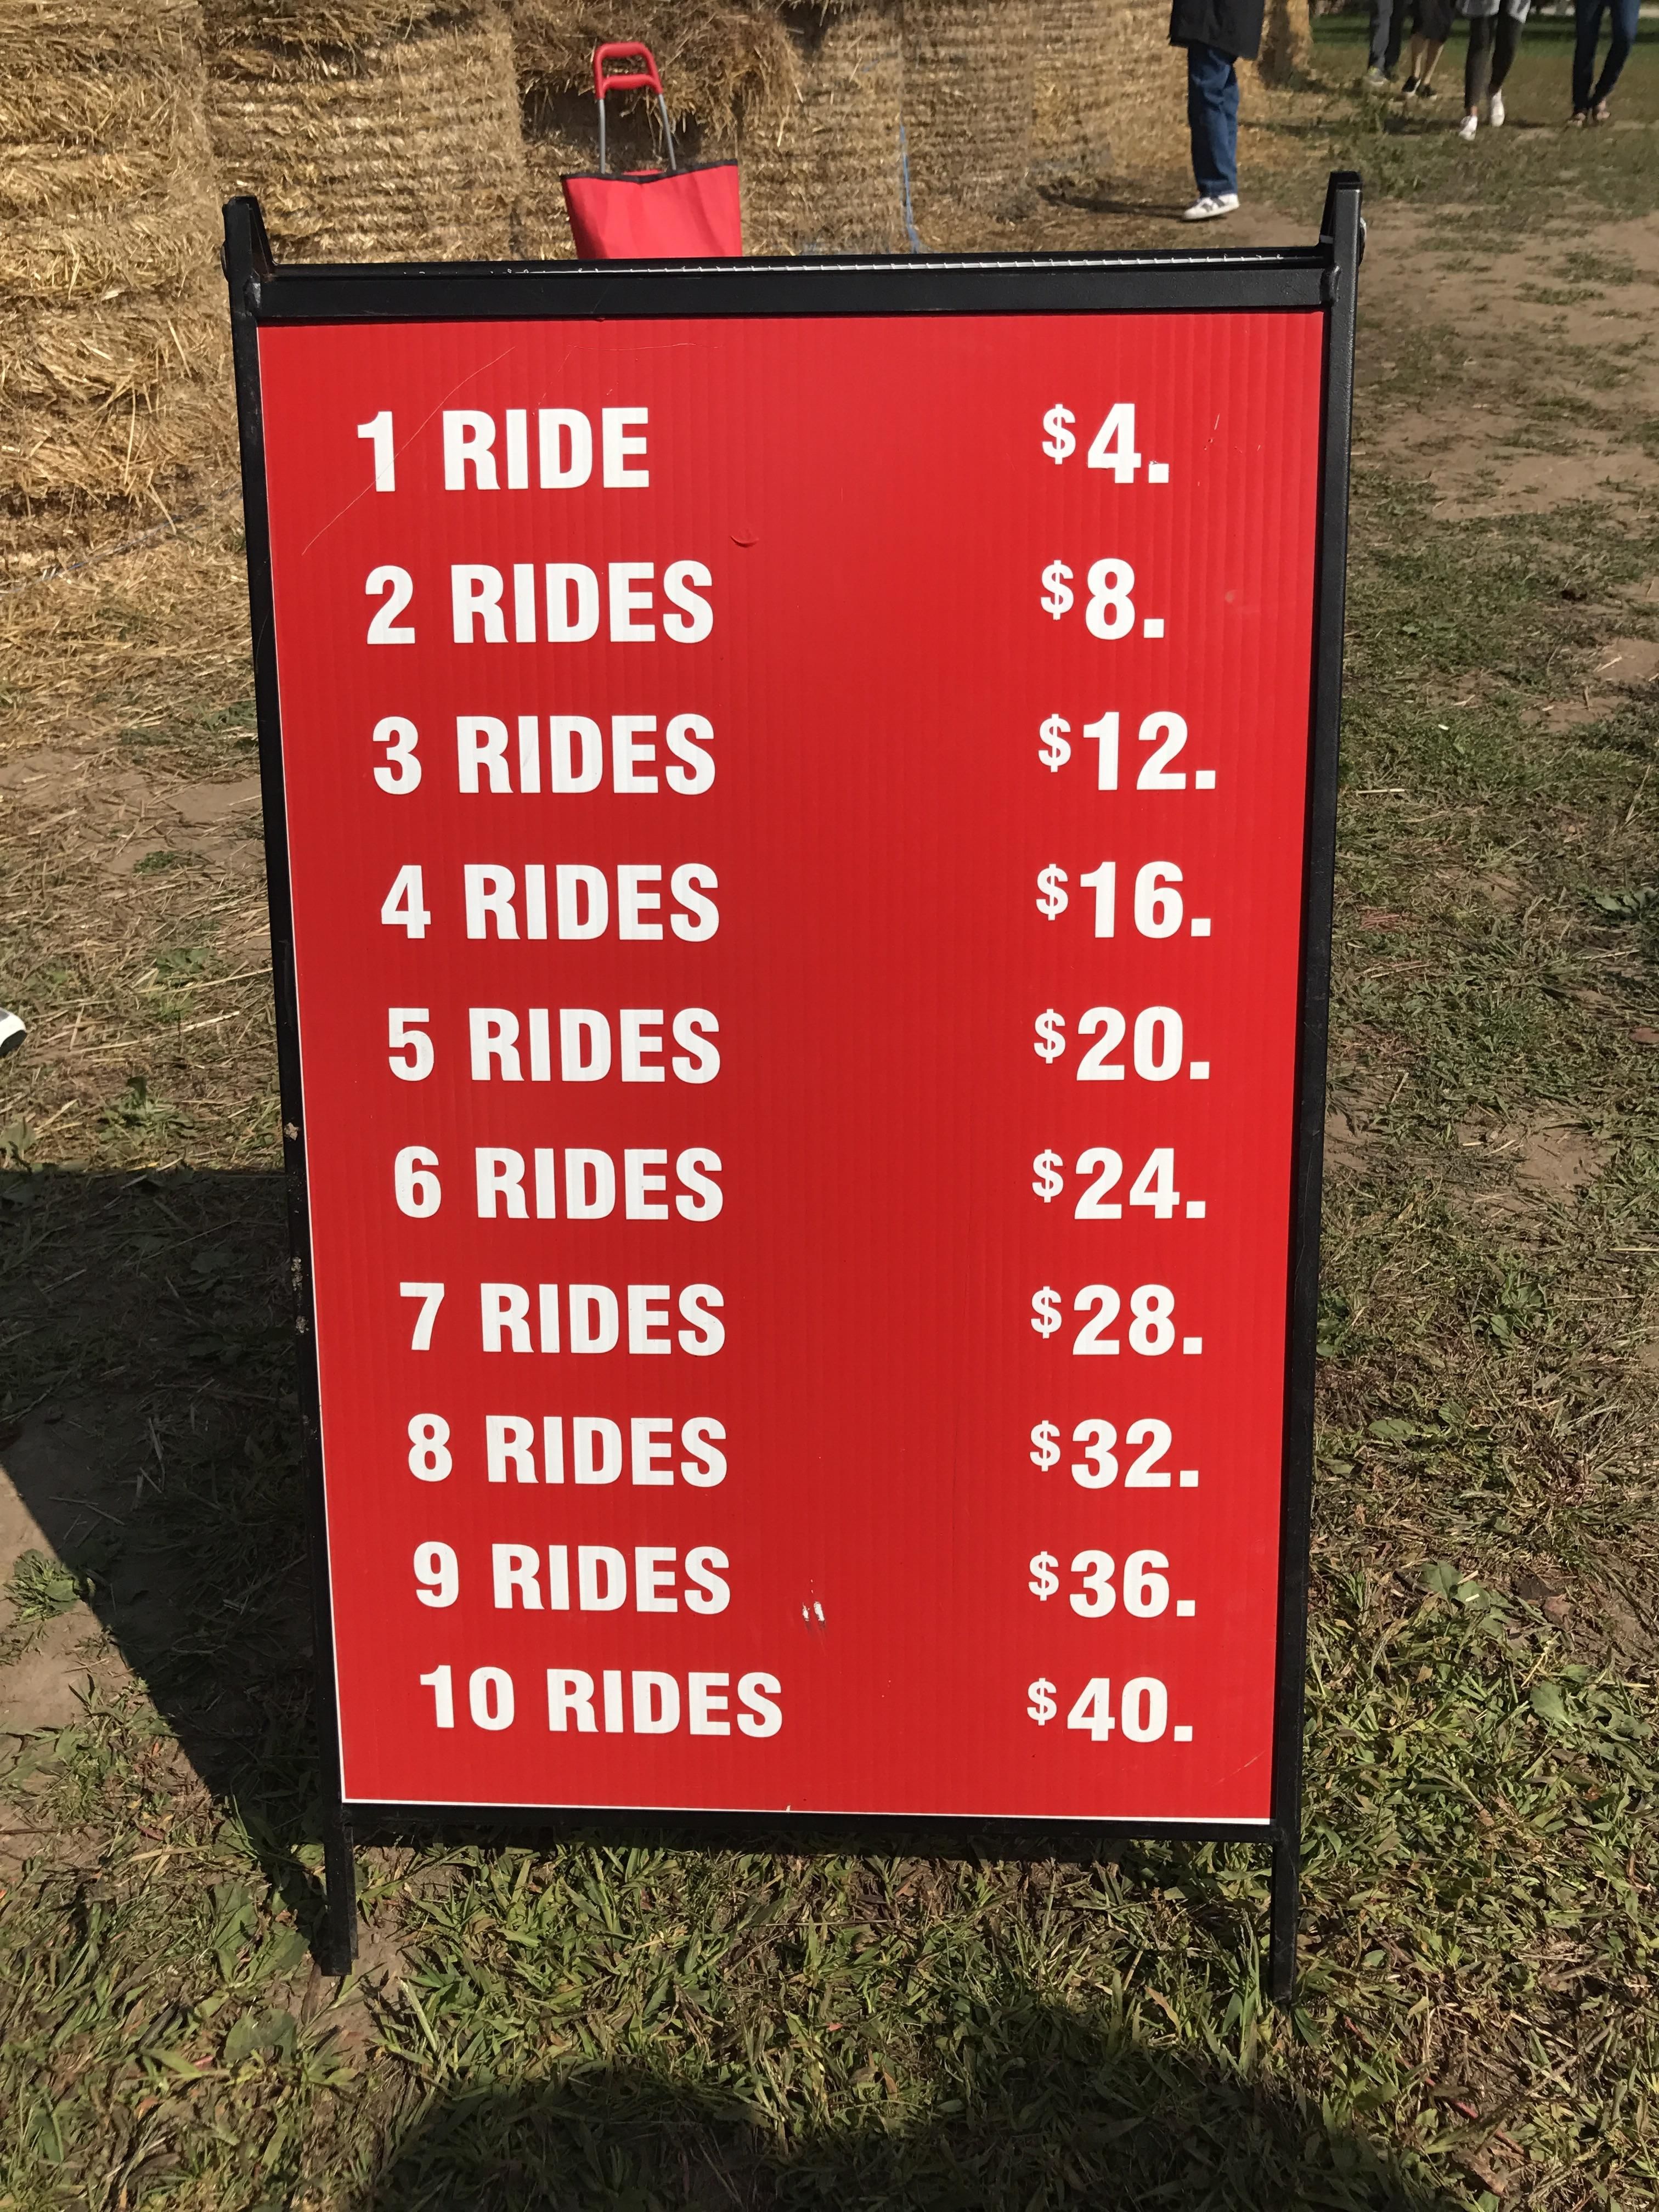 I wonder how much 11 rides would be